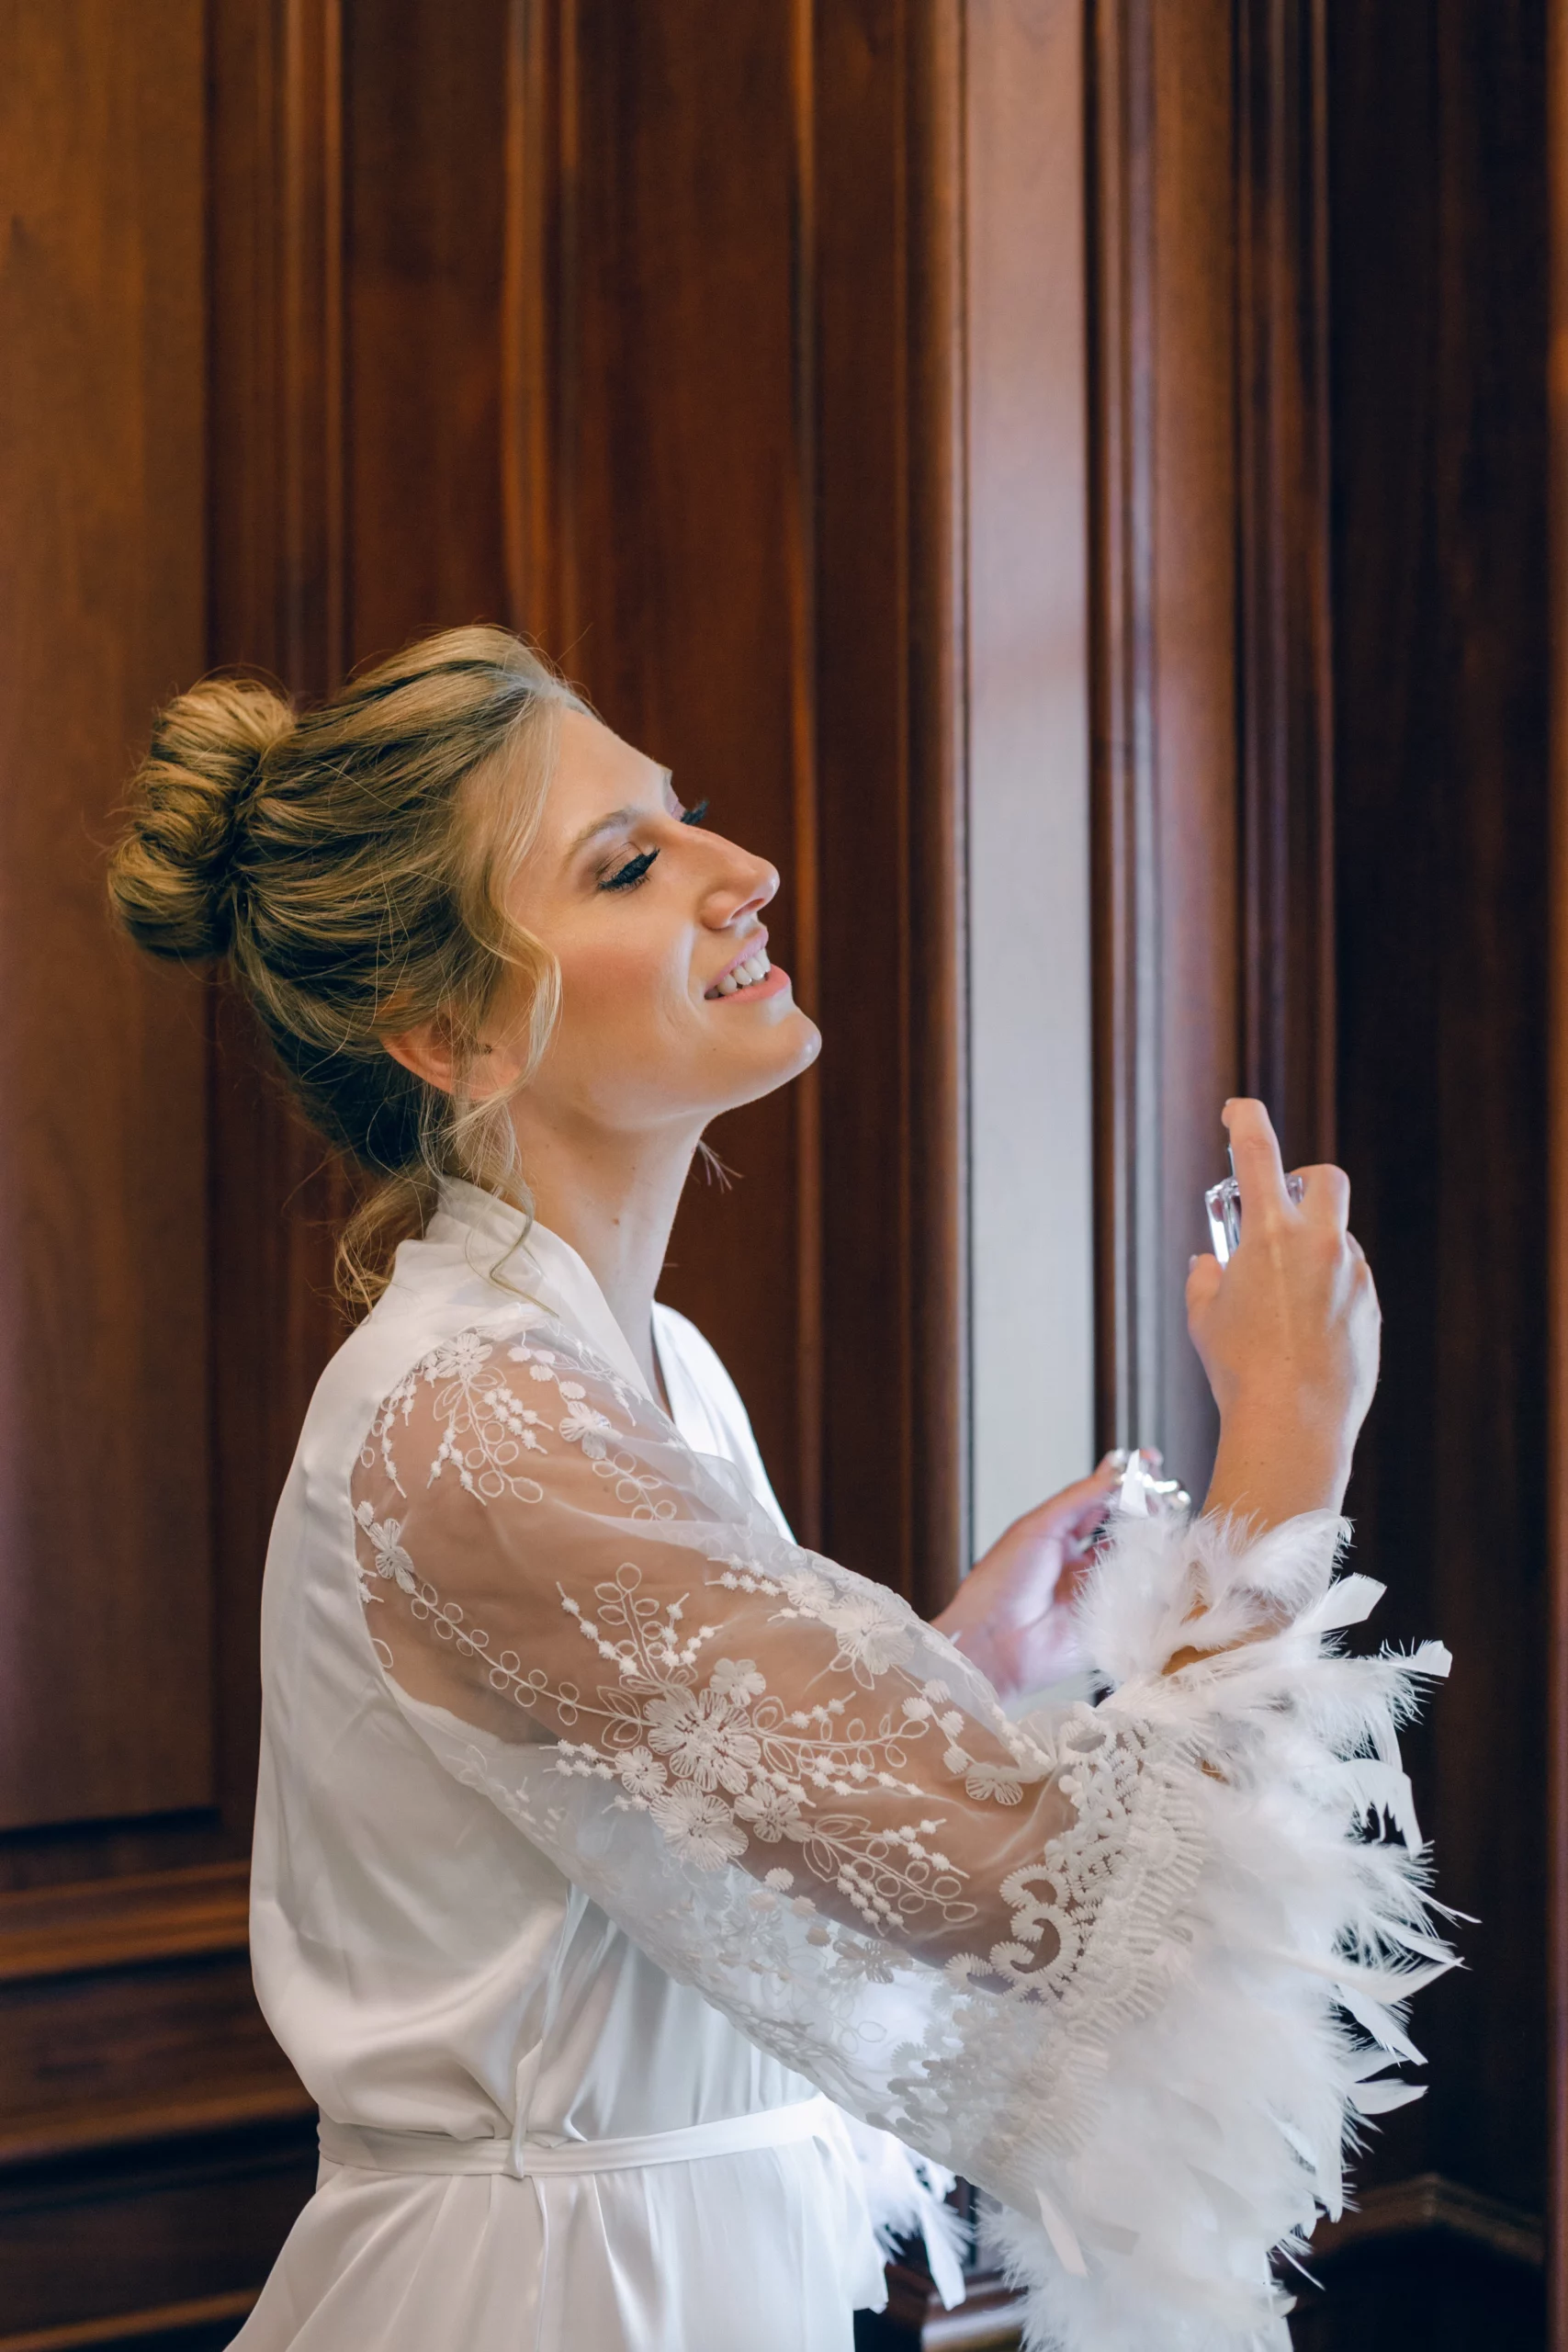 Rae Allen Photography | The bridal spraying perfume on herself in the bridal suite